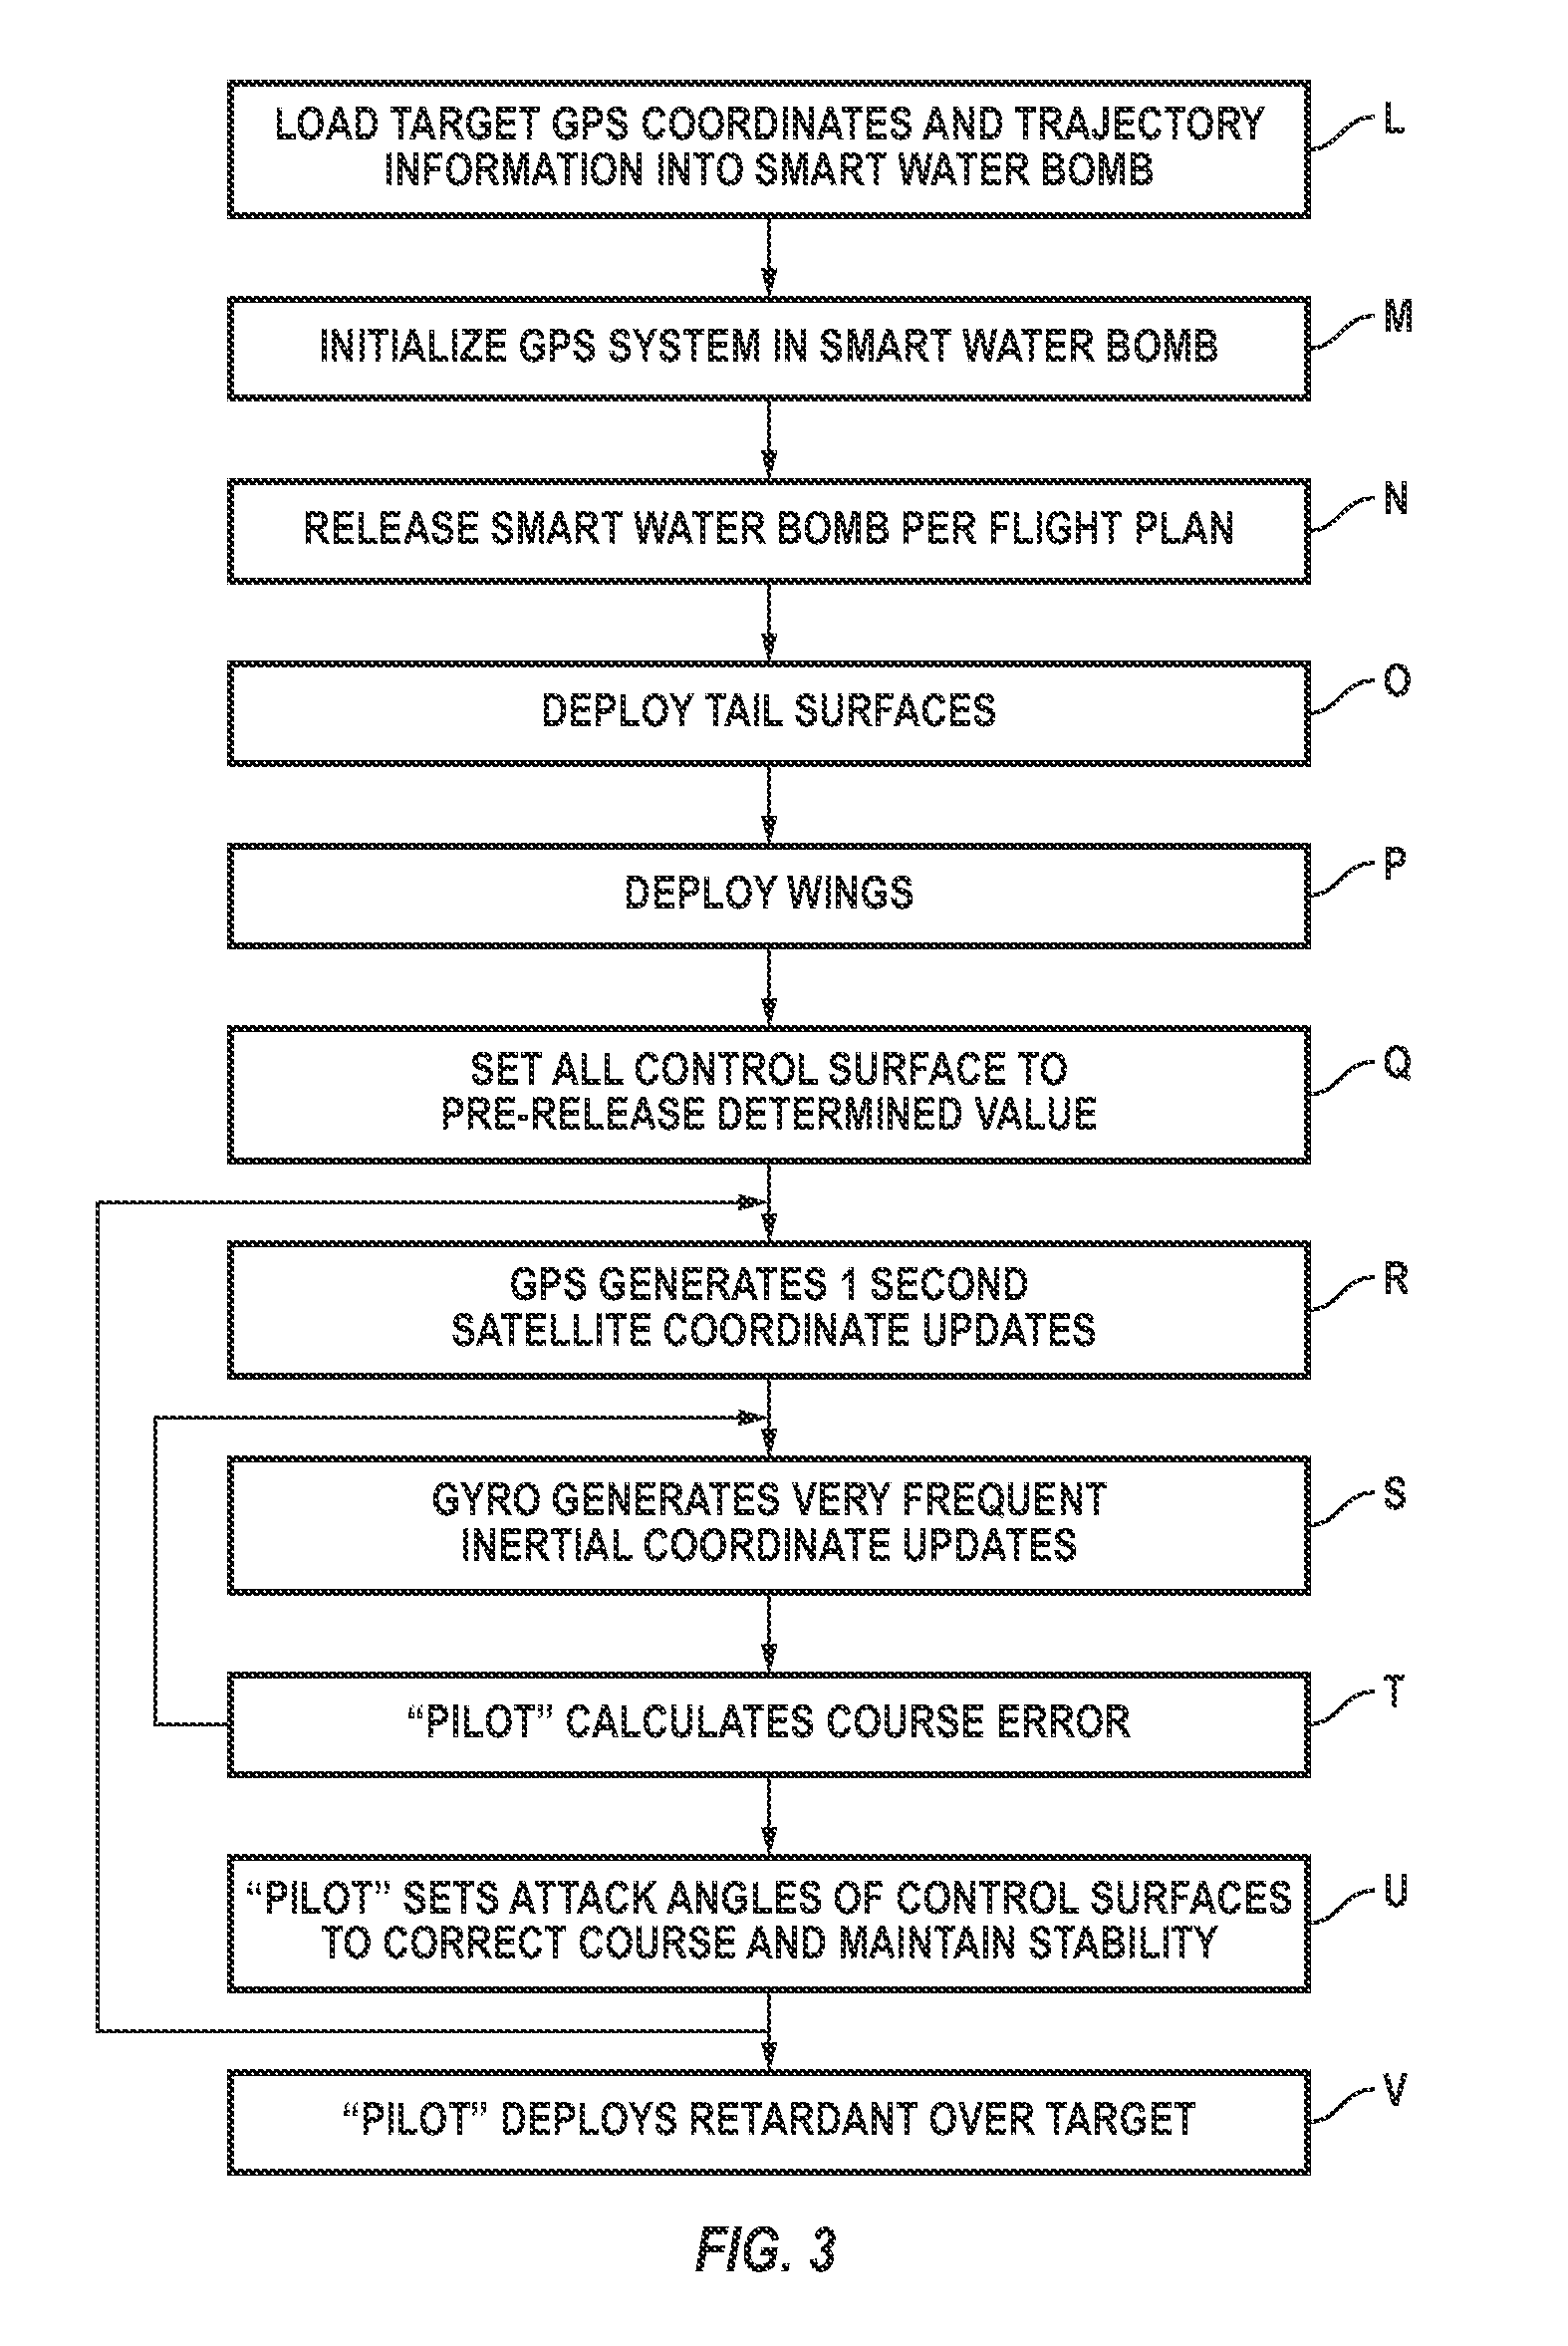 Vehicle for aerial delivery of fire retardant